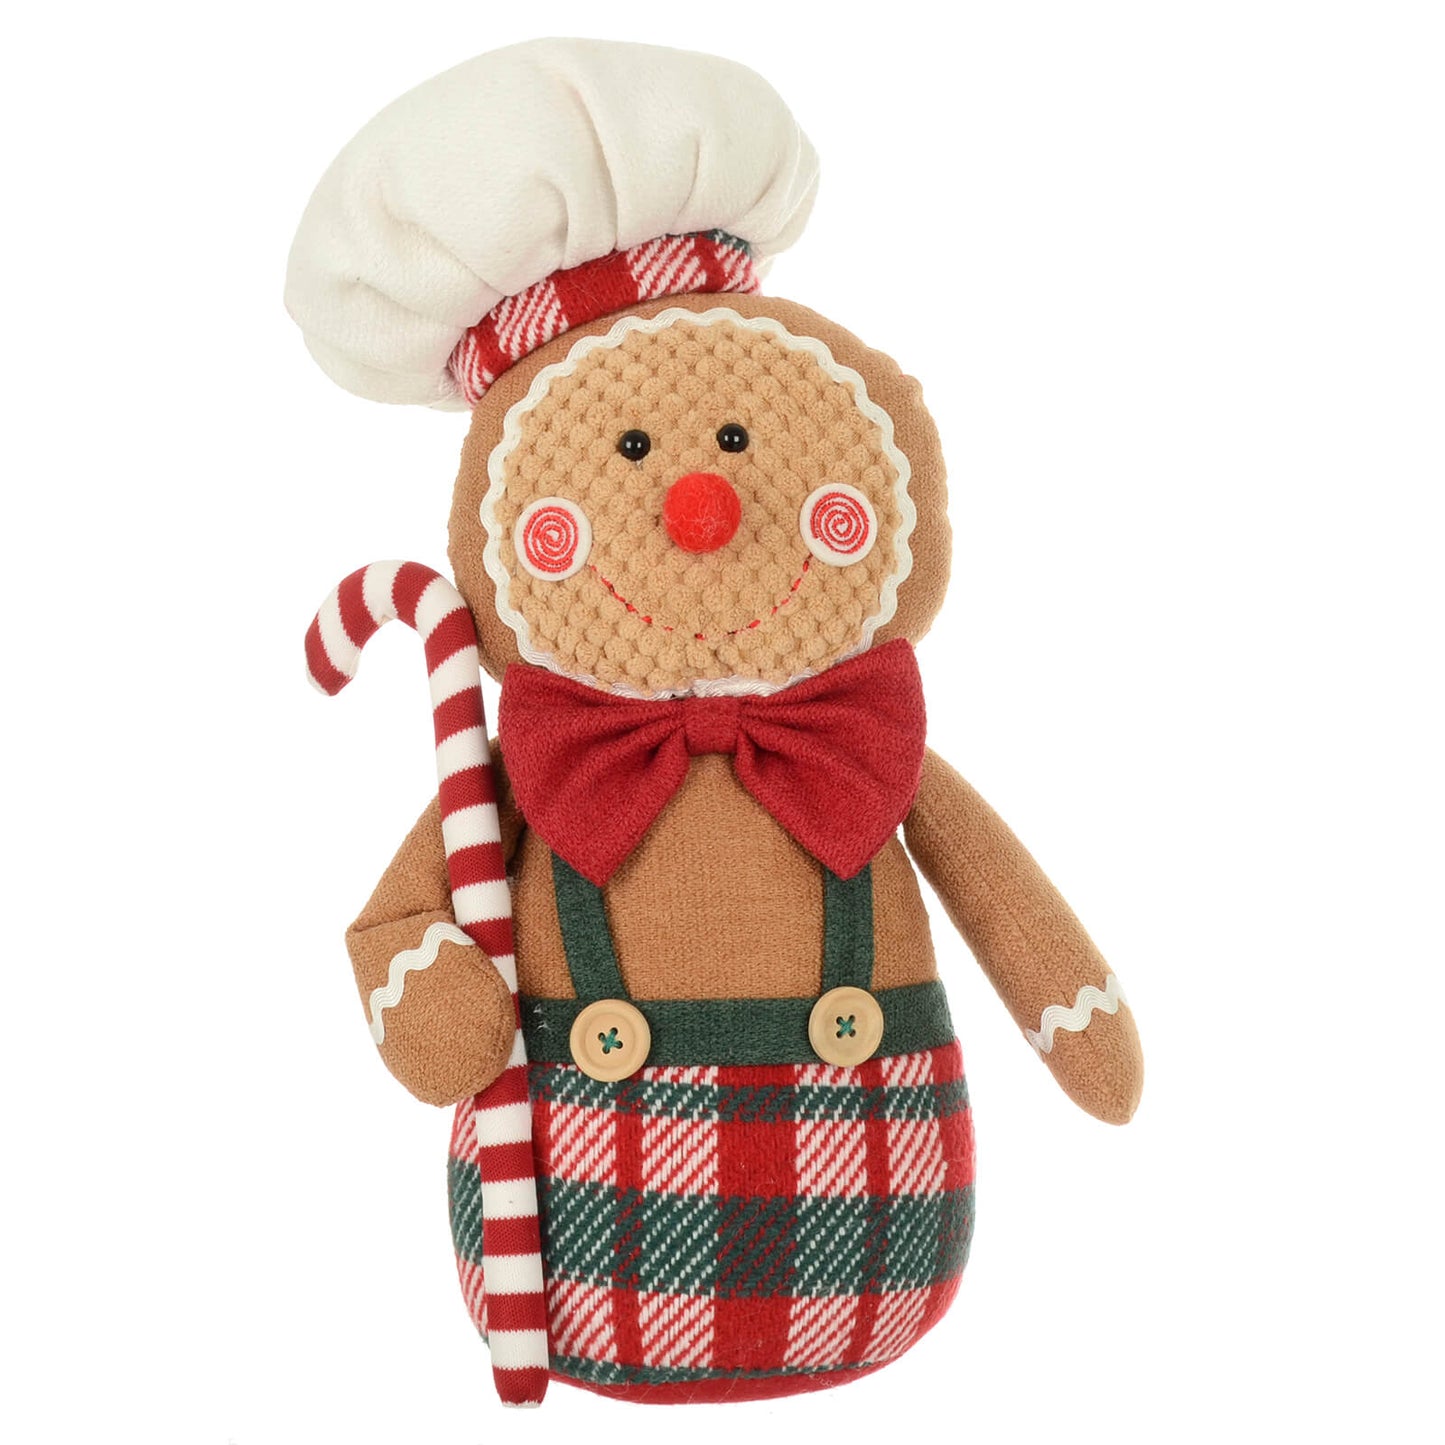 Gingerbread man 34cm figure with candy cane